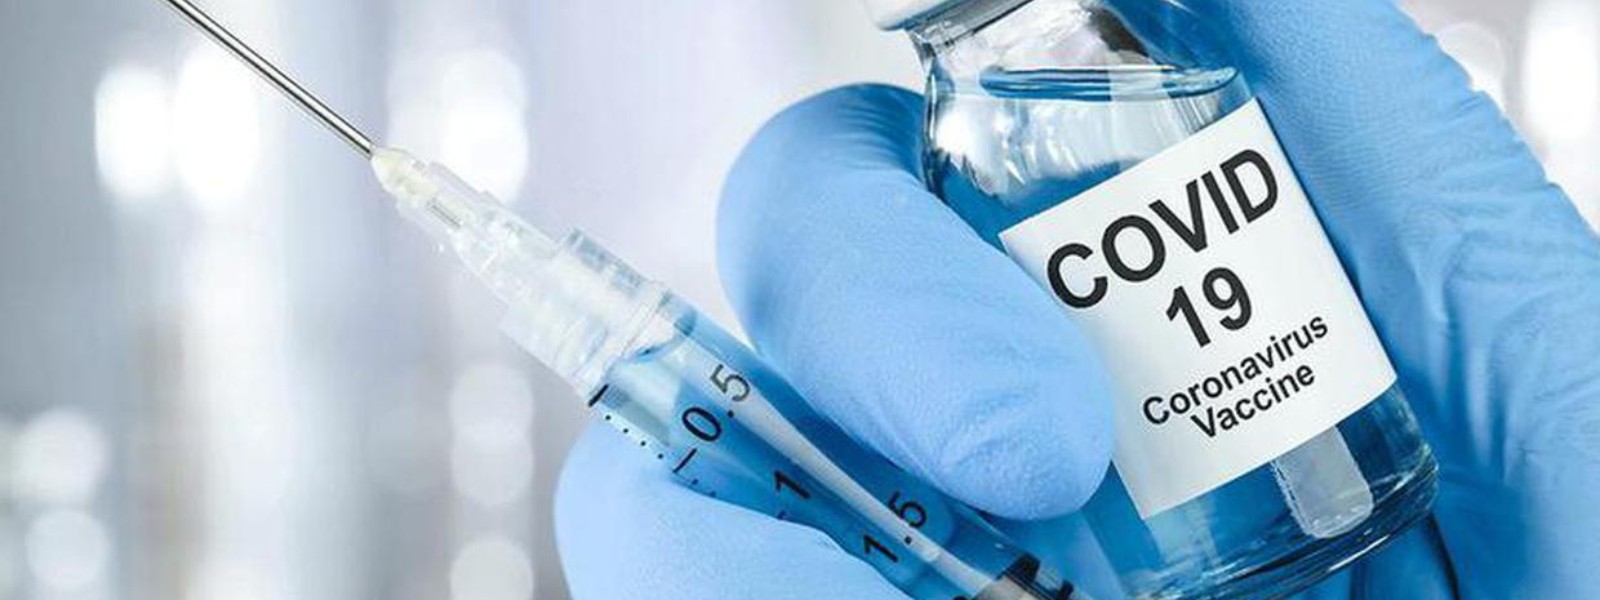 Nurses yet to receive COVID-19 vaccines; union claims